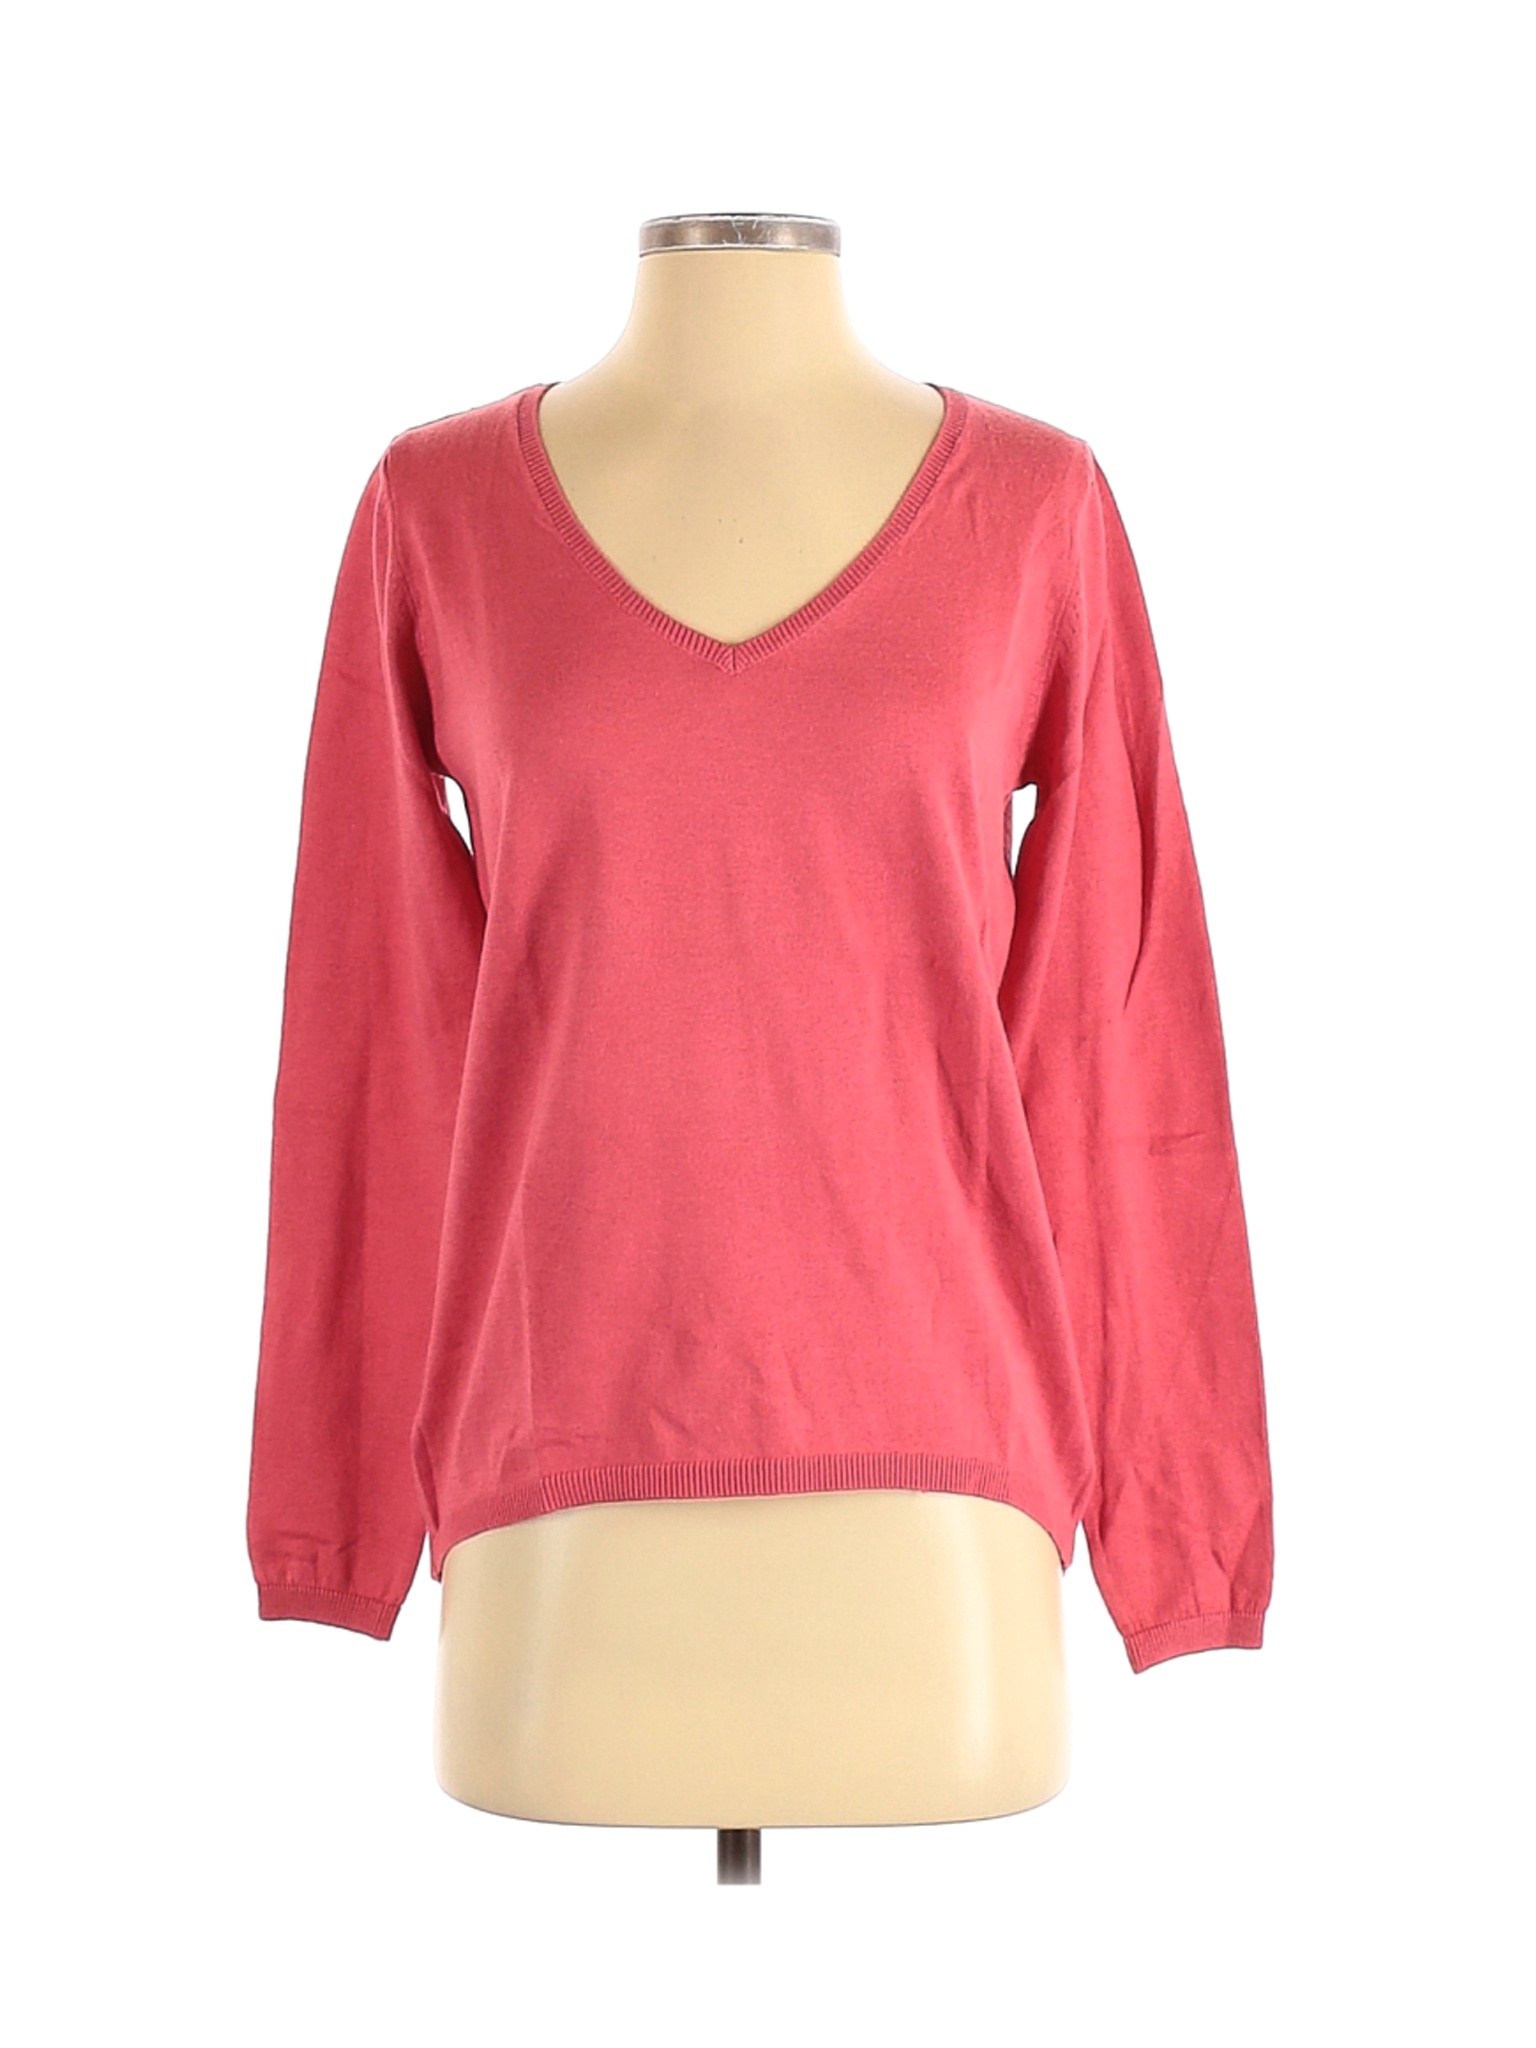 NWT Old Navy Women Pink Pullover Sweater S Petites | eBay